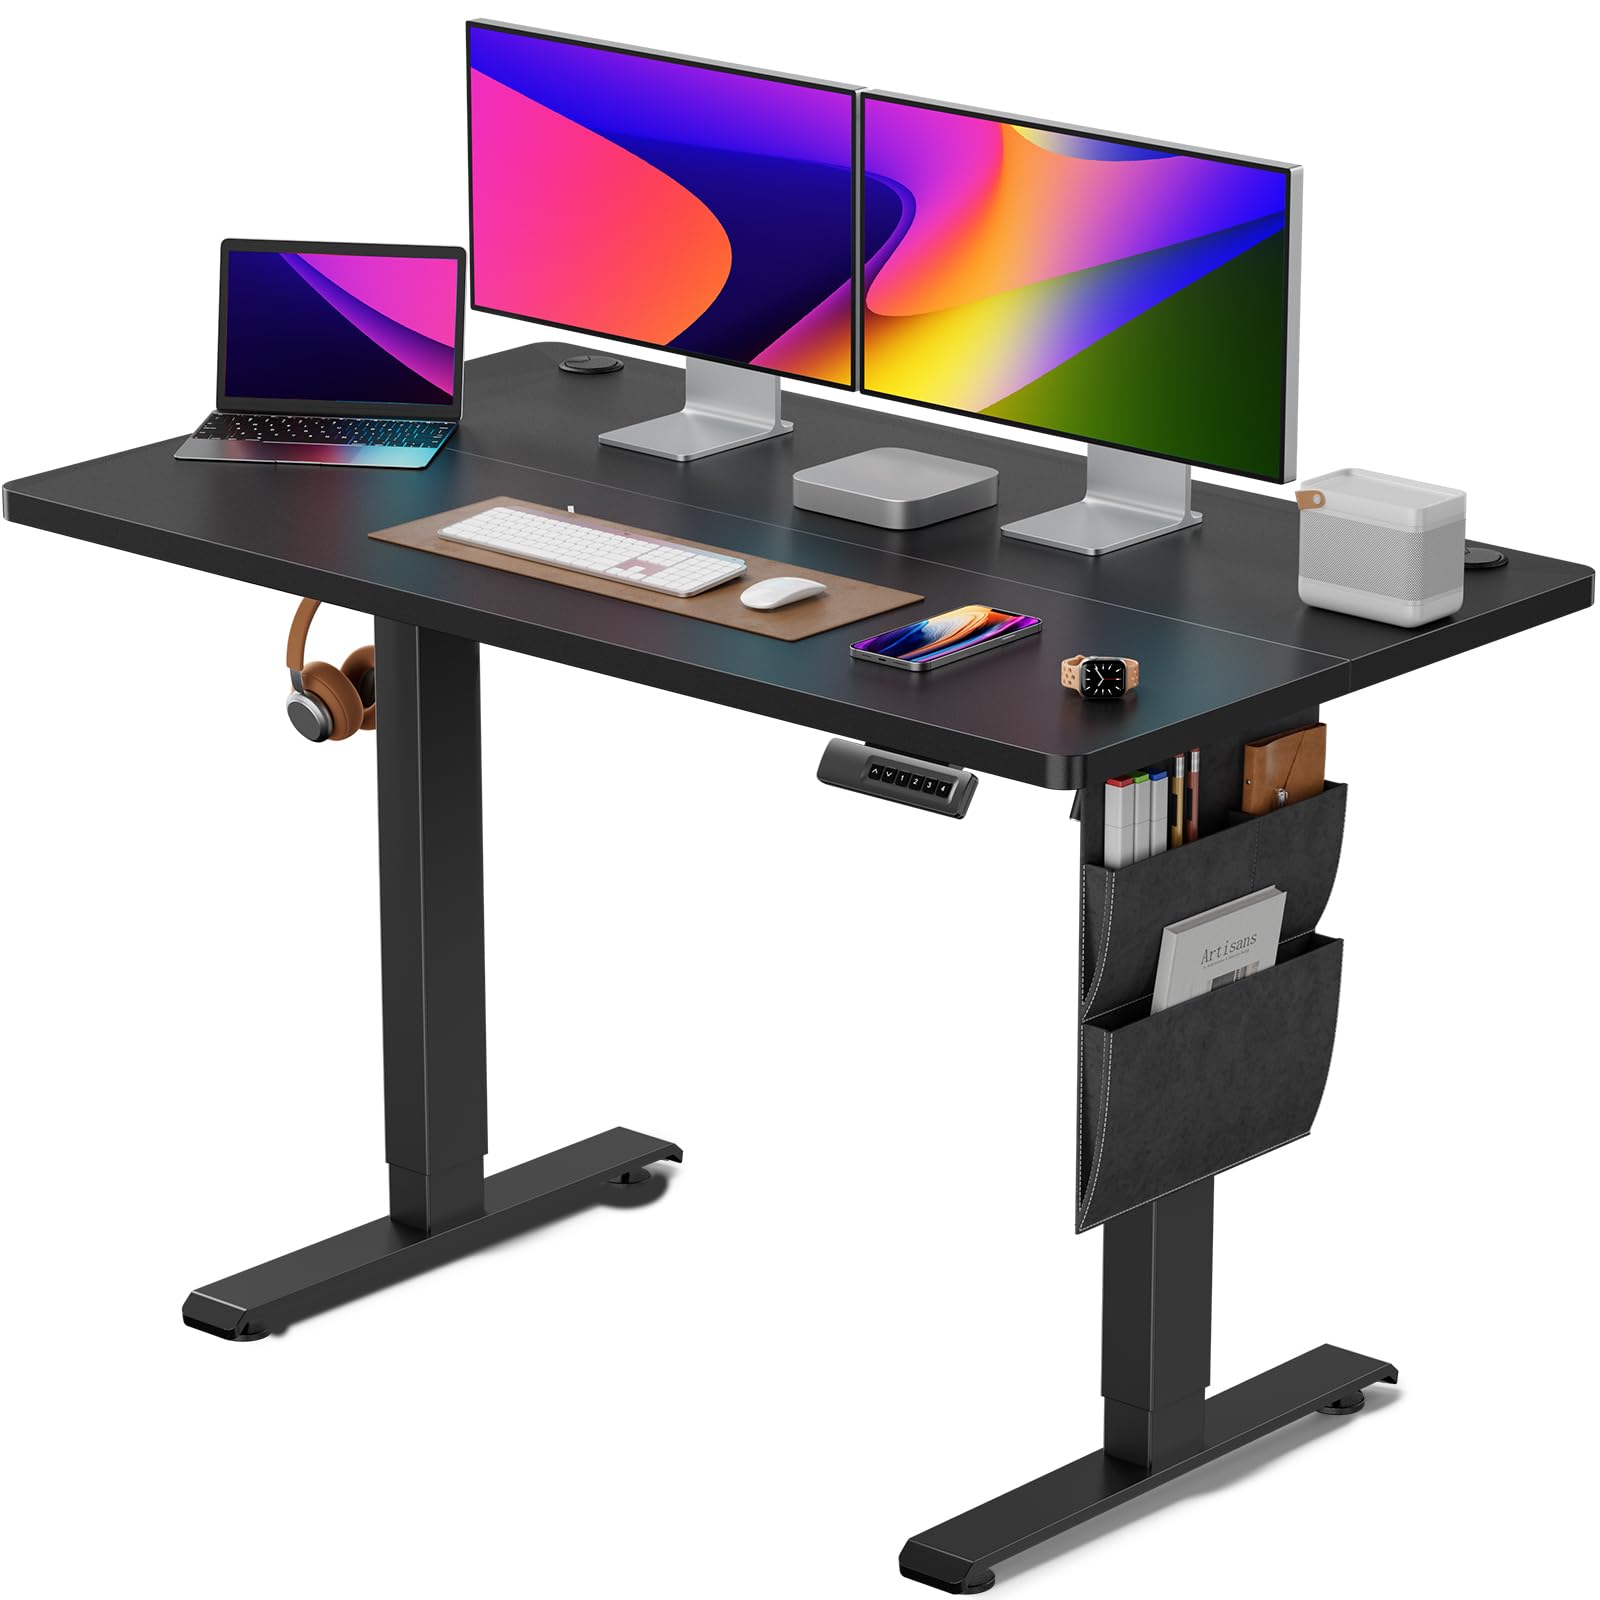 Marsail Electric Standing Desk, 48x24 Inch Adjustable Standing Desk with Storage Bag for $99.9